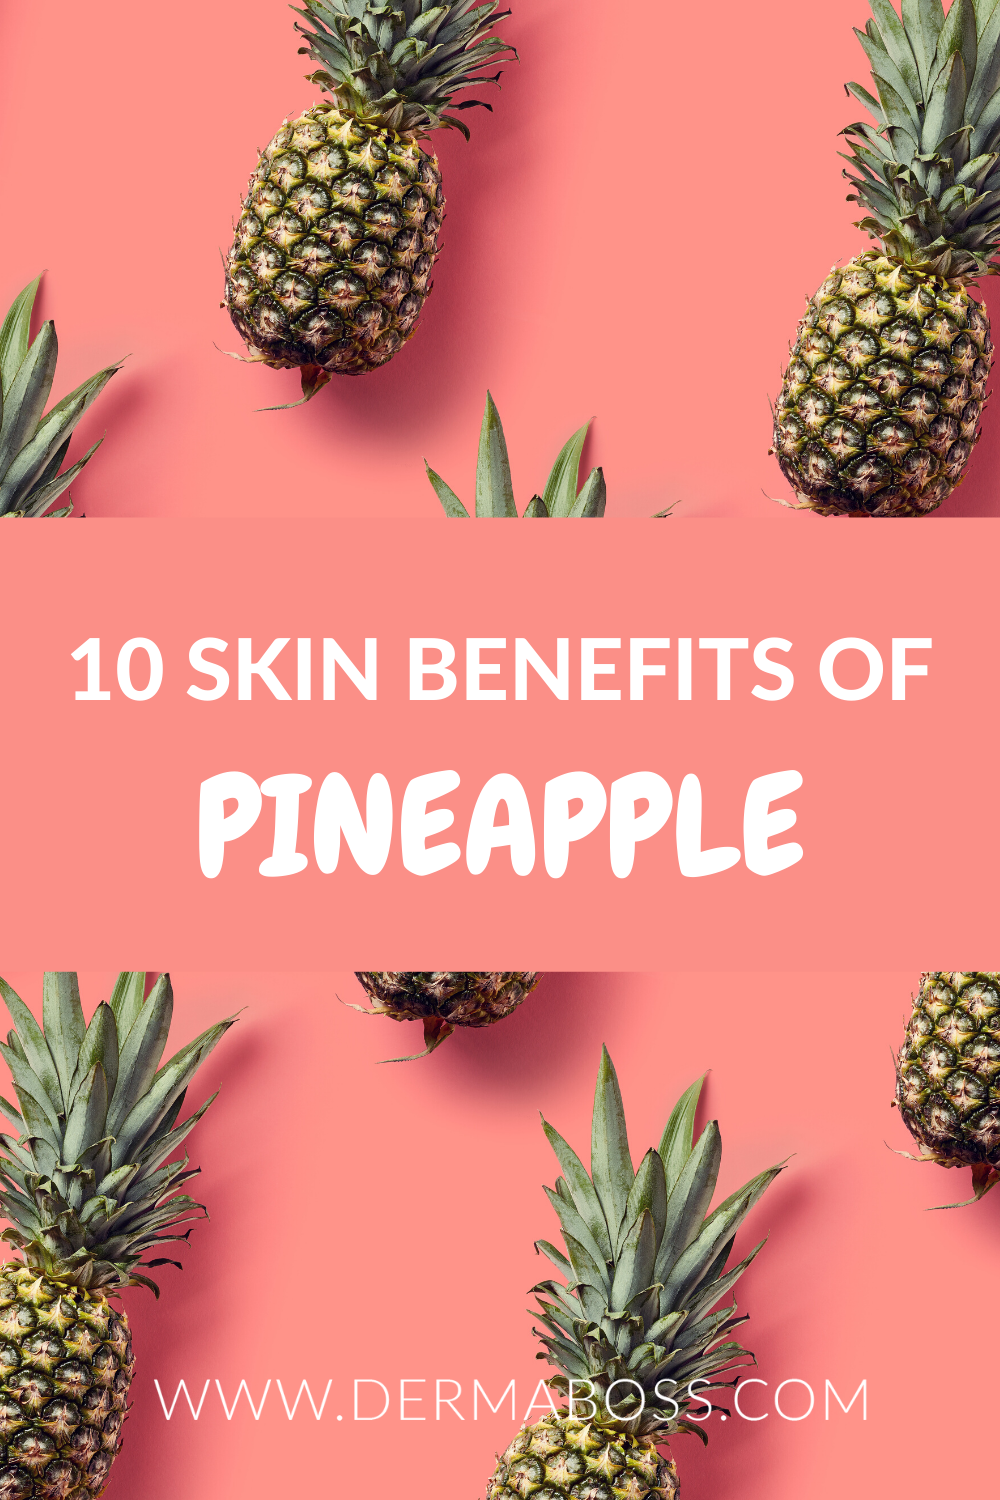 “Pineapple: The Tropical Fruit That’s Taking Skincare, Cooking, and Fashion by Storm!”